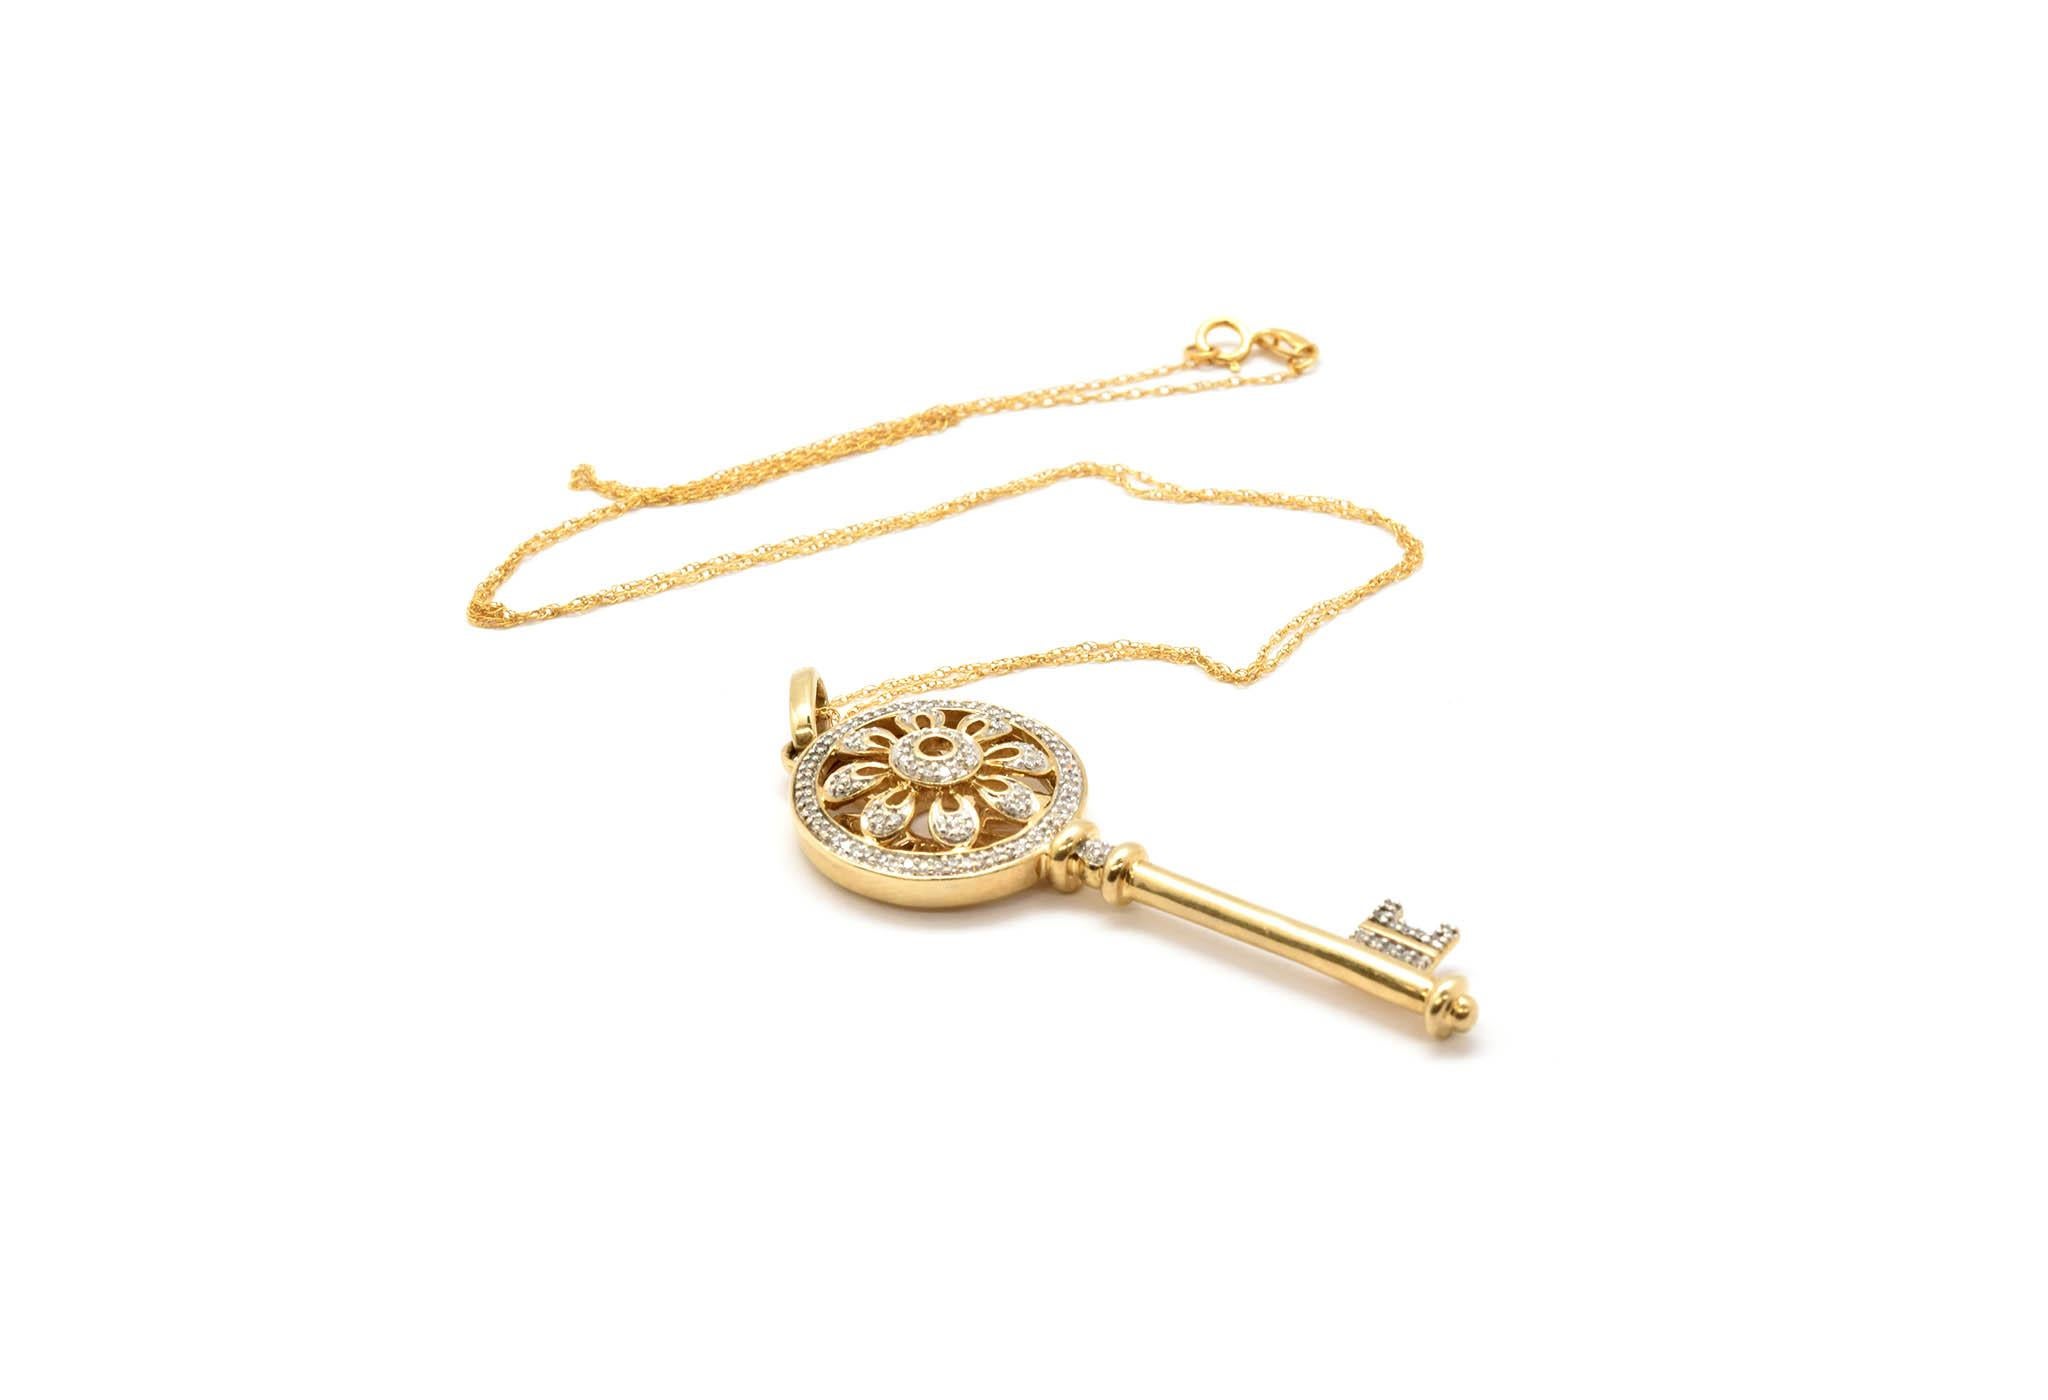 This necklace is made in solid 14k yellow gold bar links with a lobster clasp. The links measure 4.25mm wide, and the necklace measures 24 inches in length. It weighs 24.08 grams. The key pendant is made of 14k yellow gold and measures 2” inches